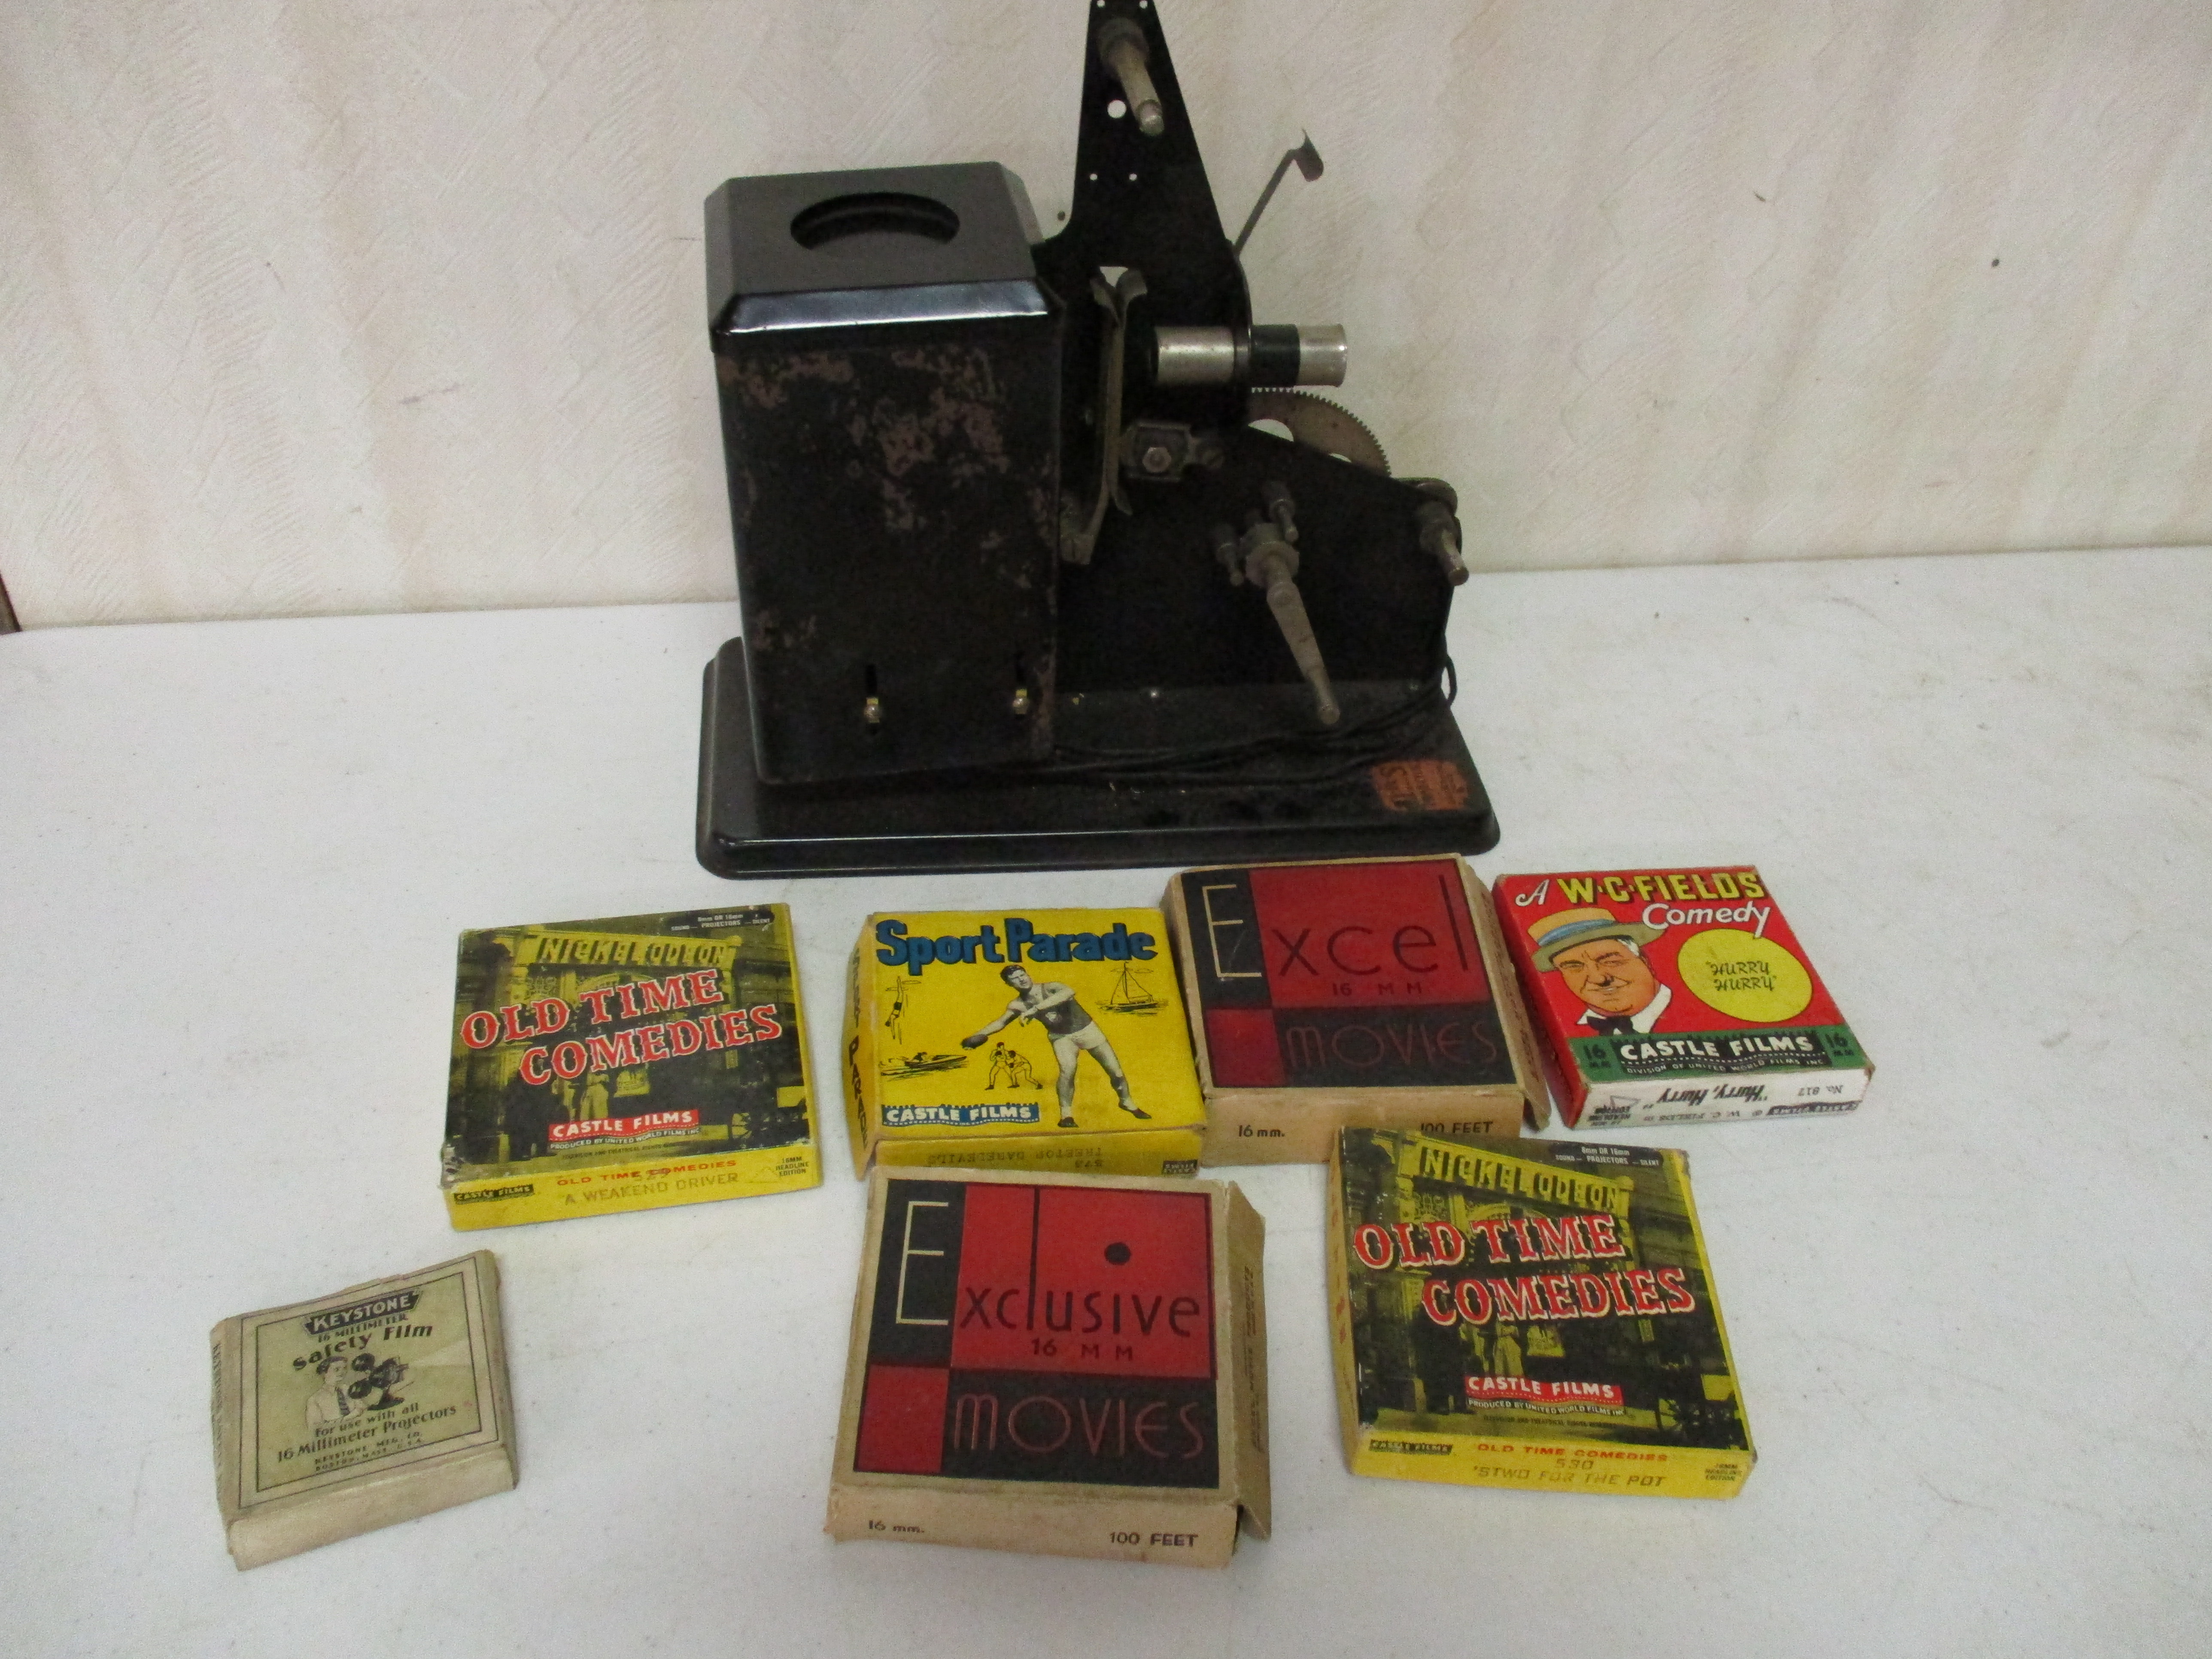 Lot 252: Vintage Film Projector With Film Reels